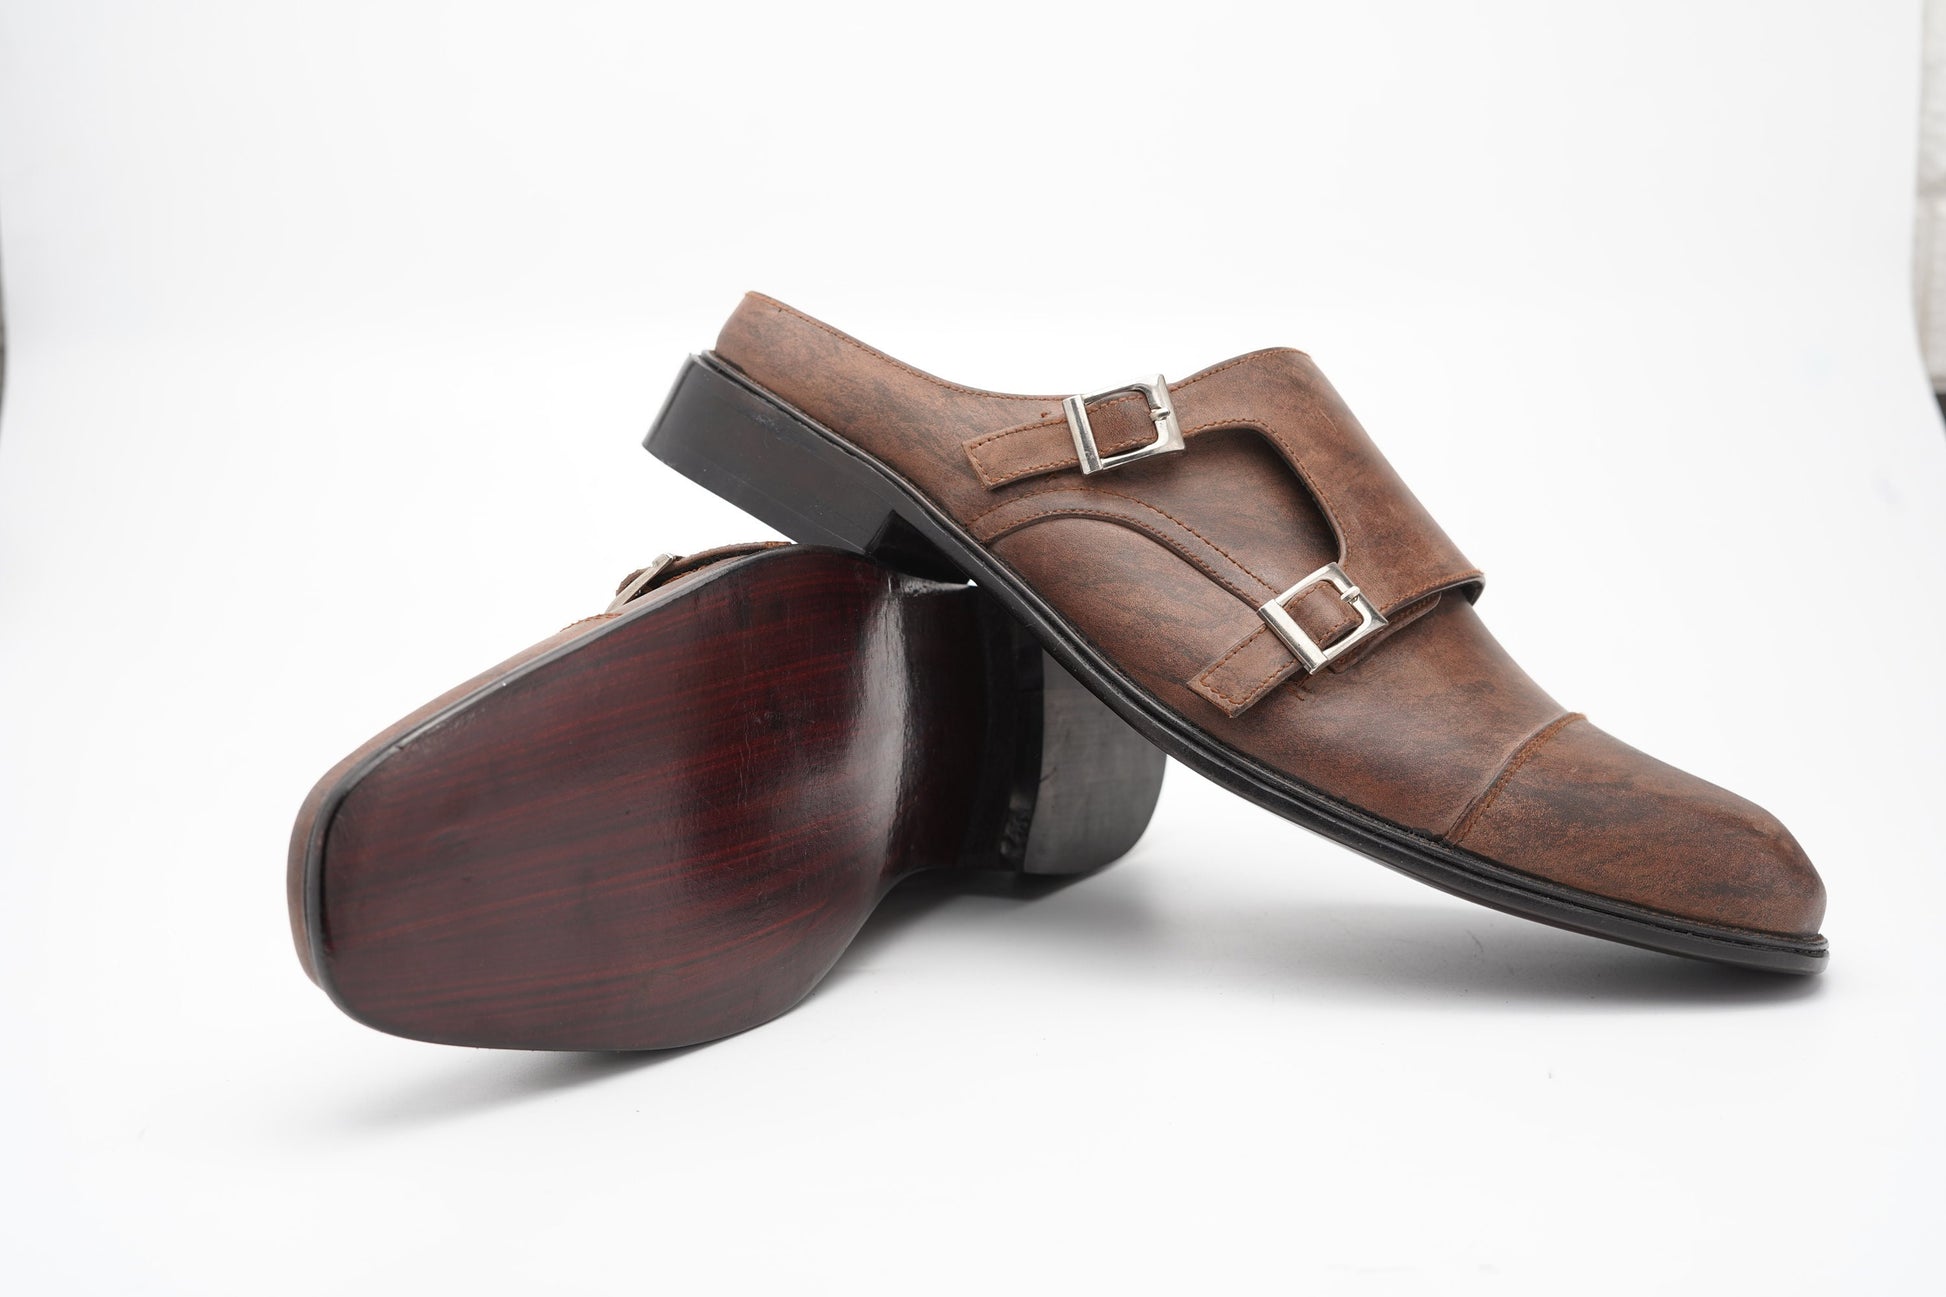 Brown marble patina double Buckle Slip on Mule made using Premium Quality Oily Pull-Up Leather Custom Made-To-Order Shoes Real Handmade Woozy Store